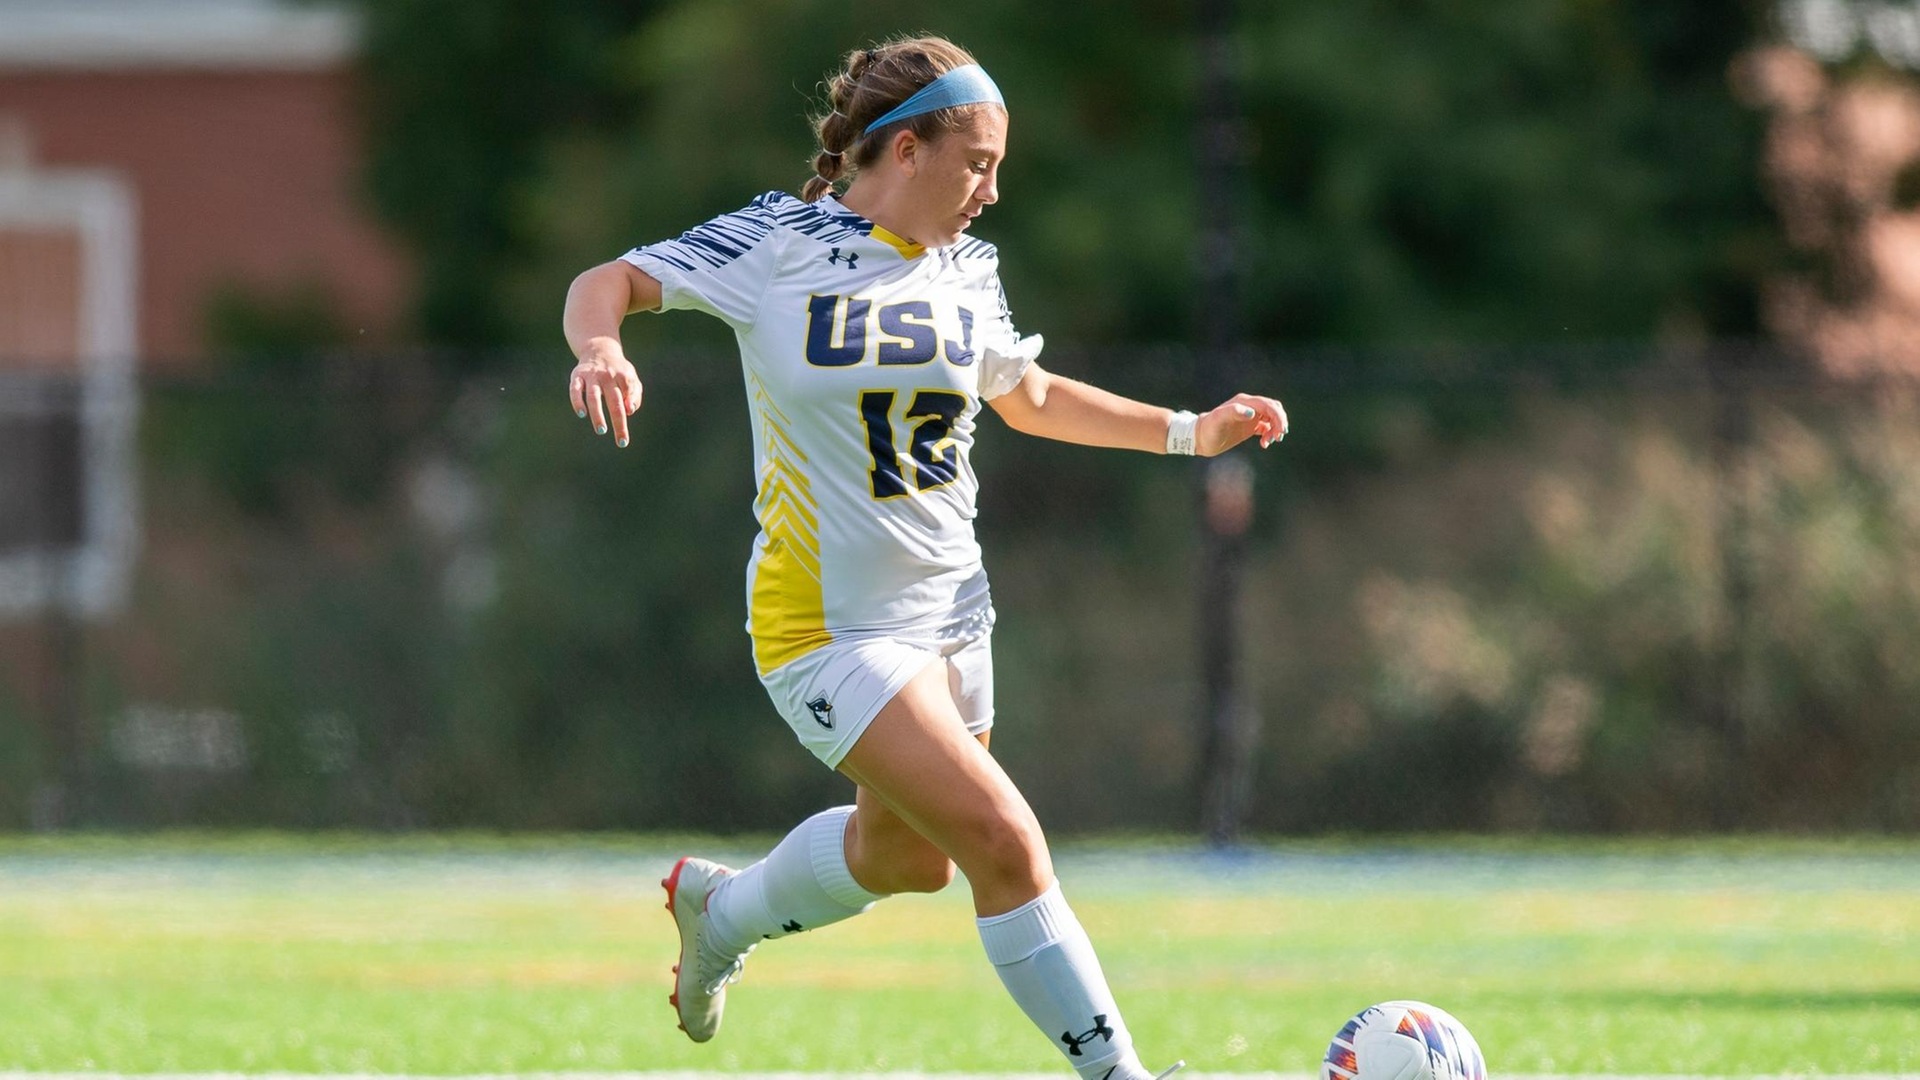 Zup Brace Helps Women's Soccer to Win Over New England College Saturday, 5-1